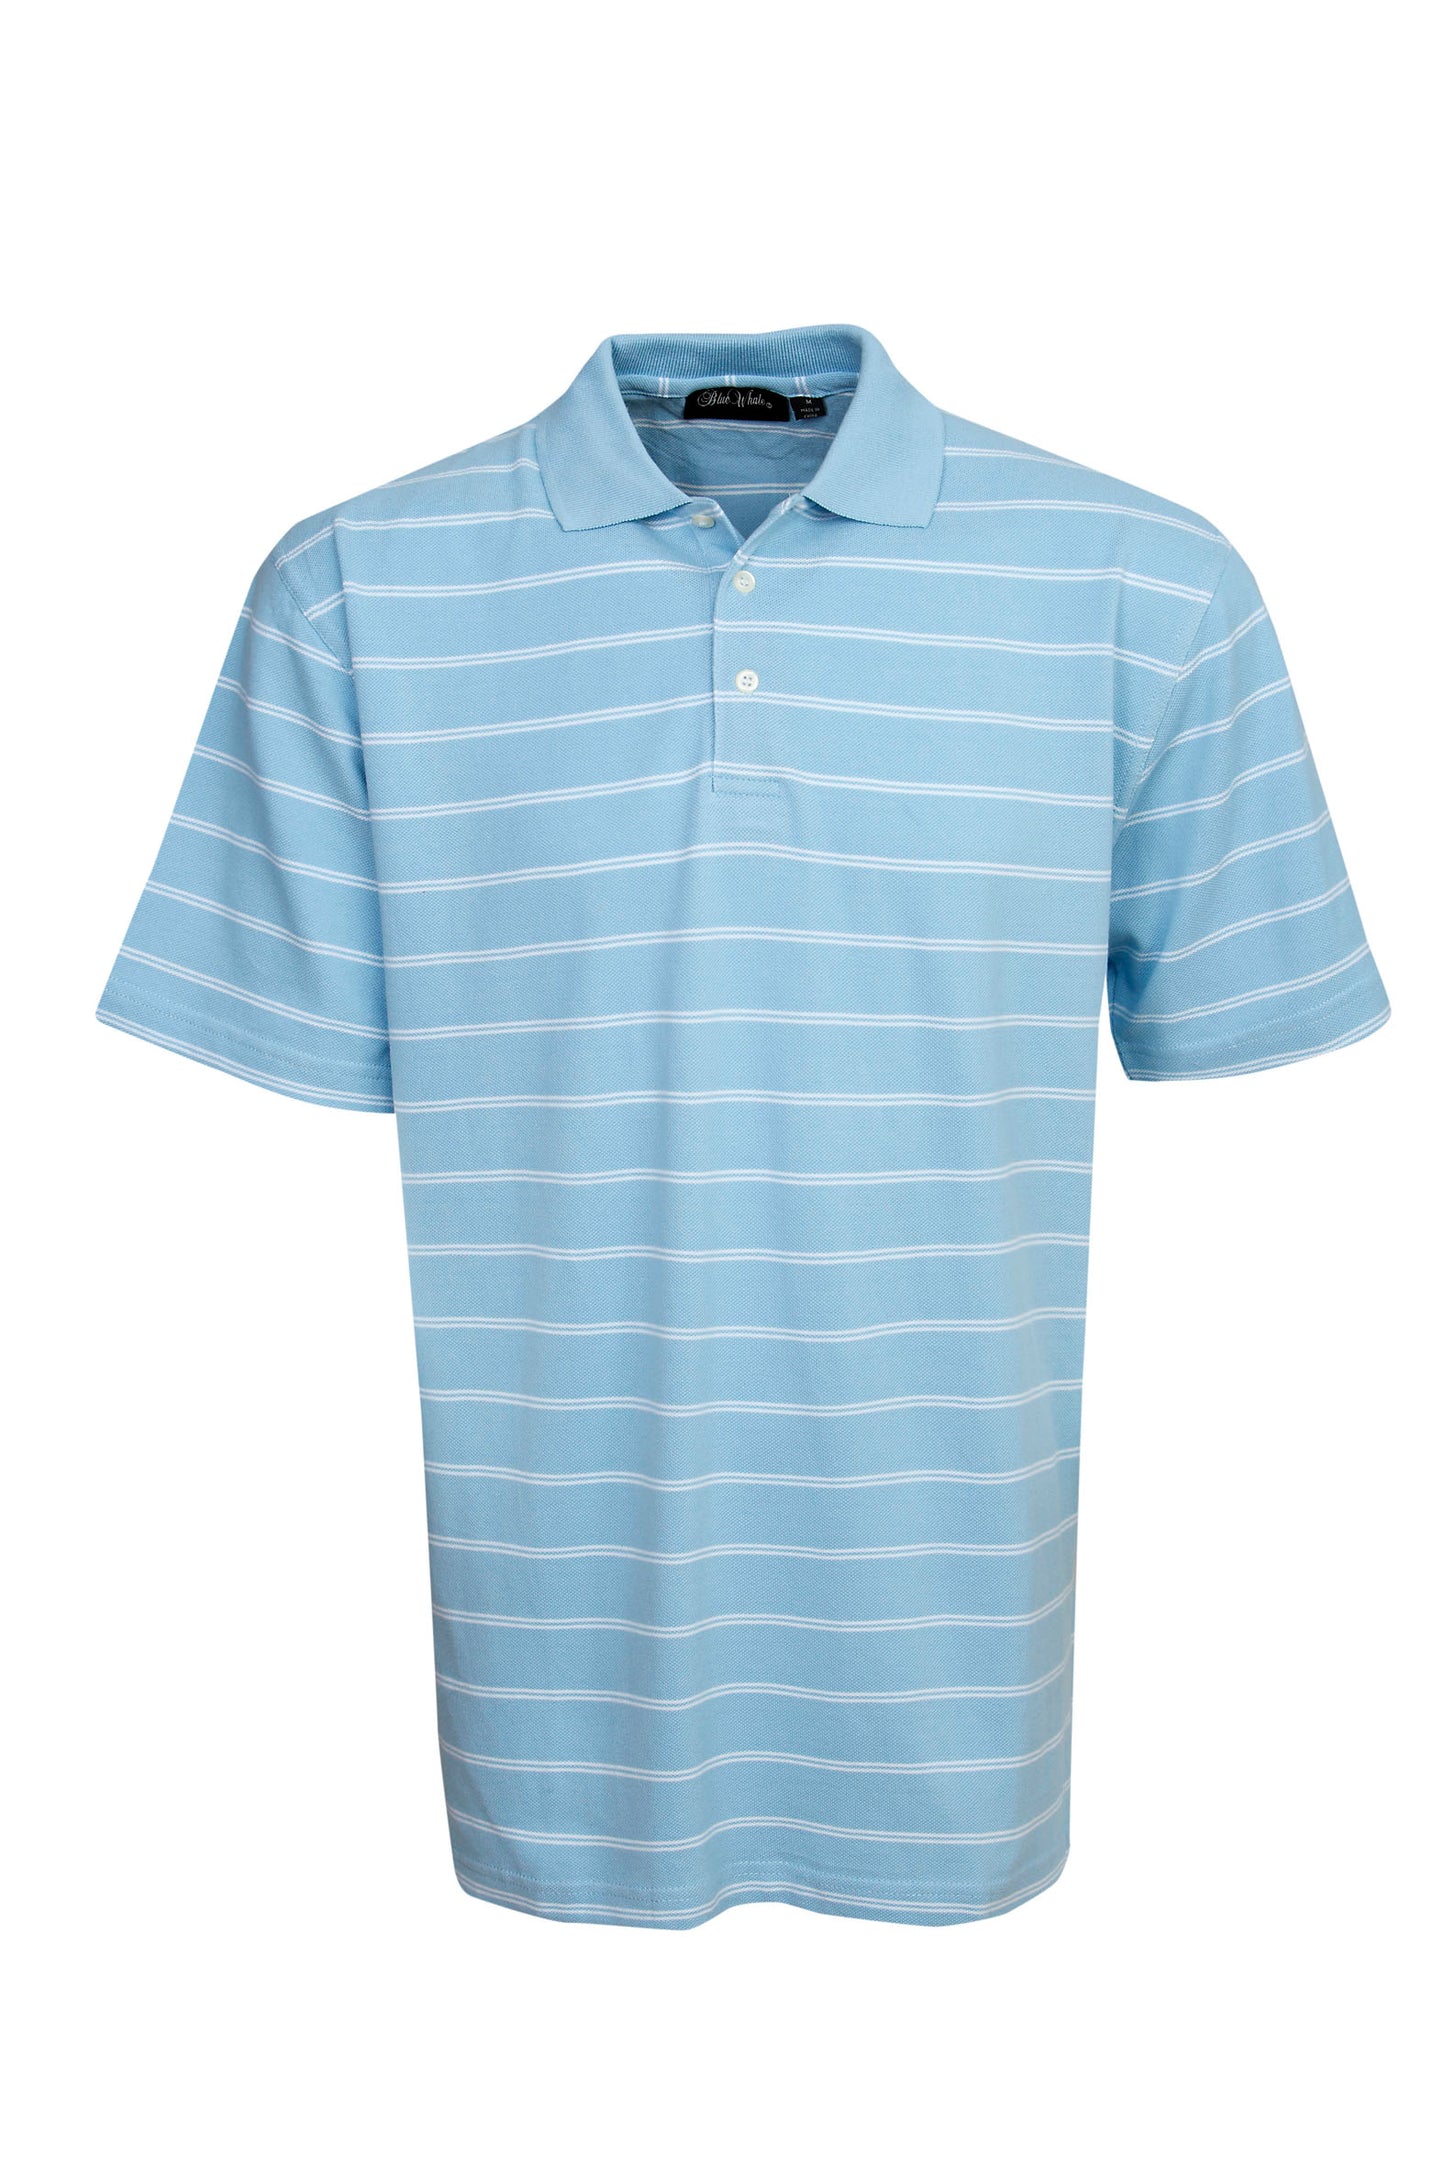 Blue Whale Adults Stripped Cotton Pique Polo